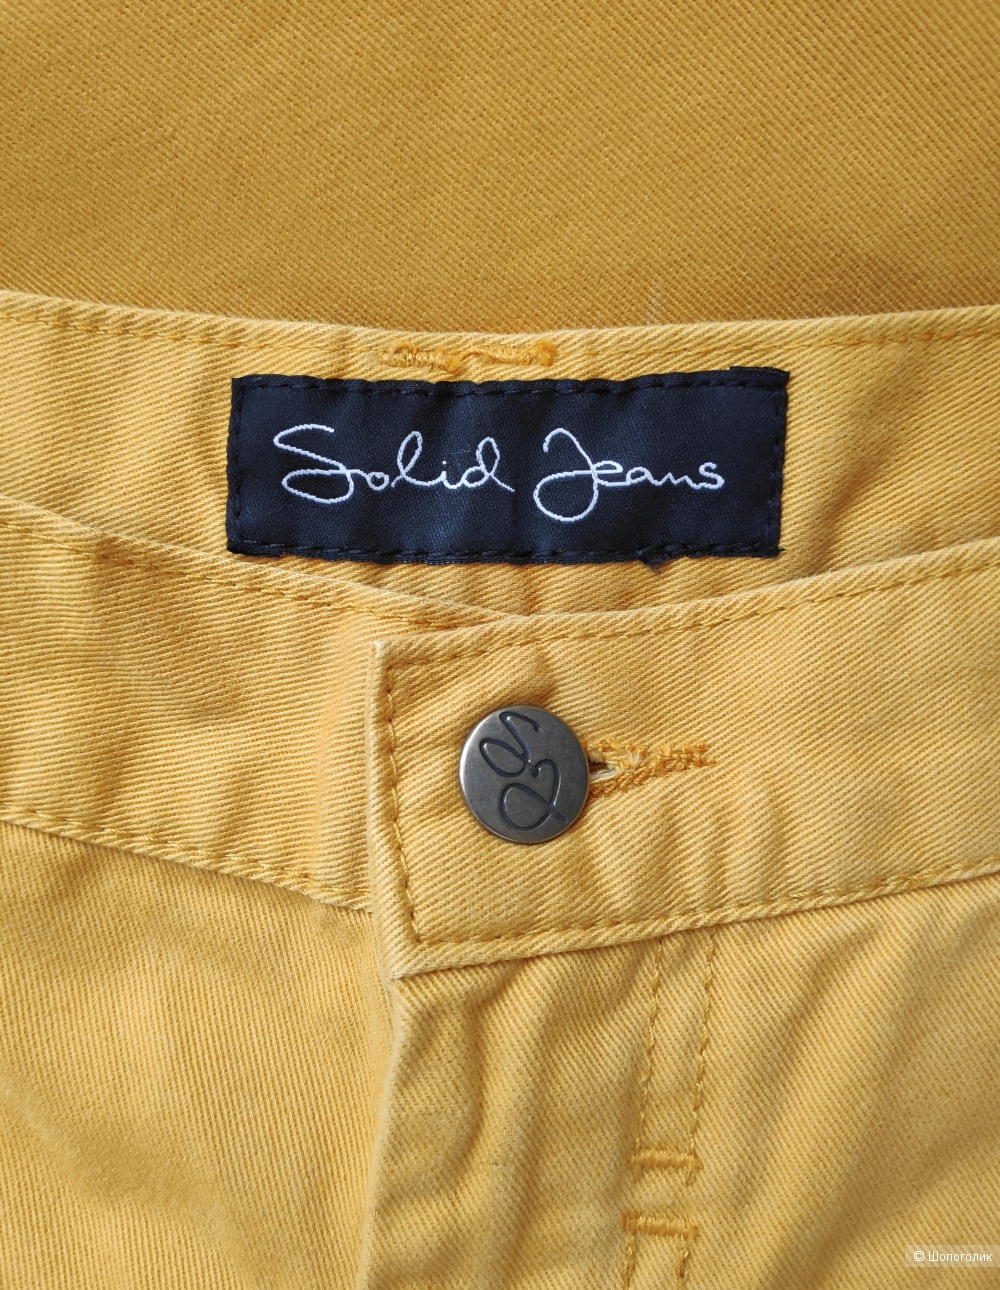 Брюки Solid Jeans, размер 26/32.